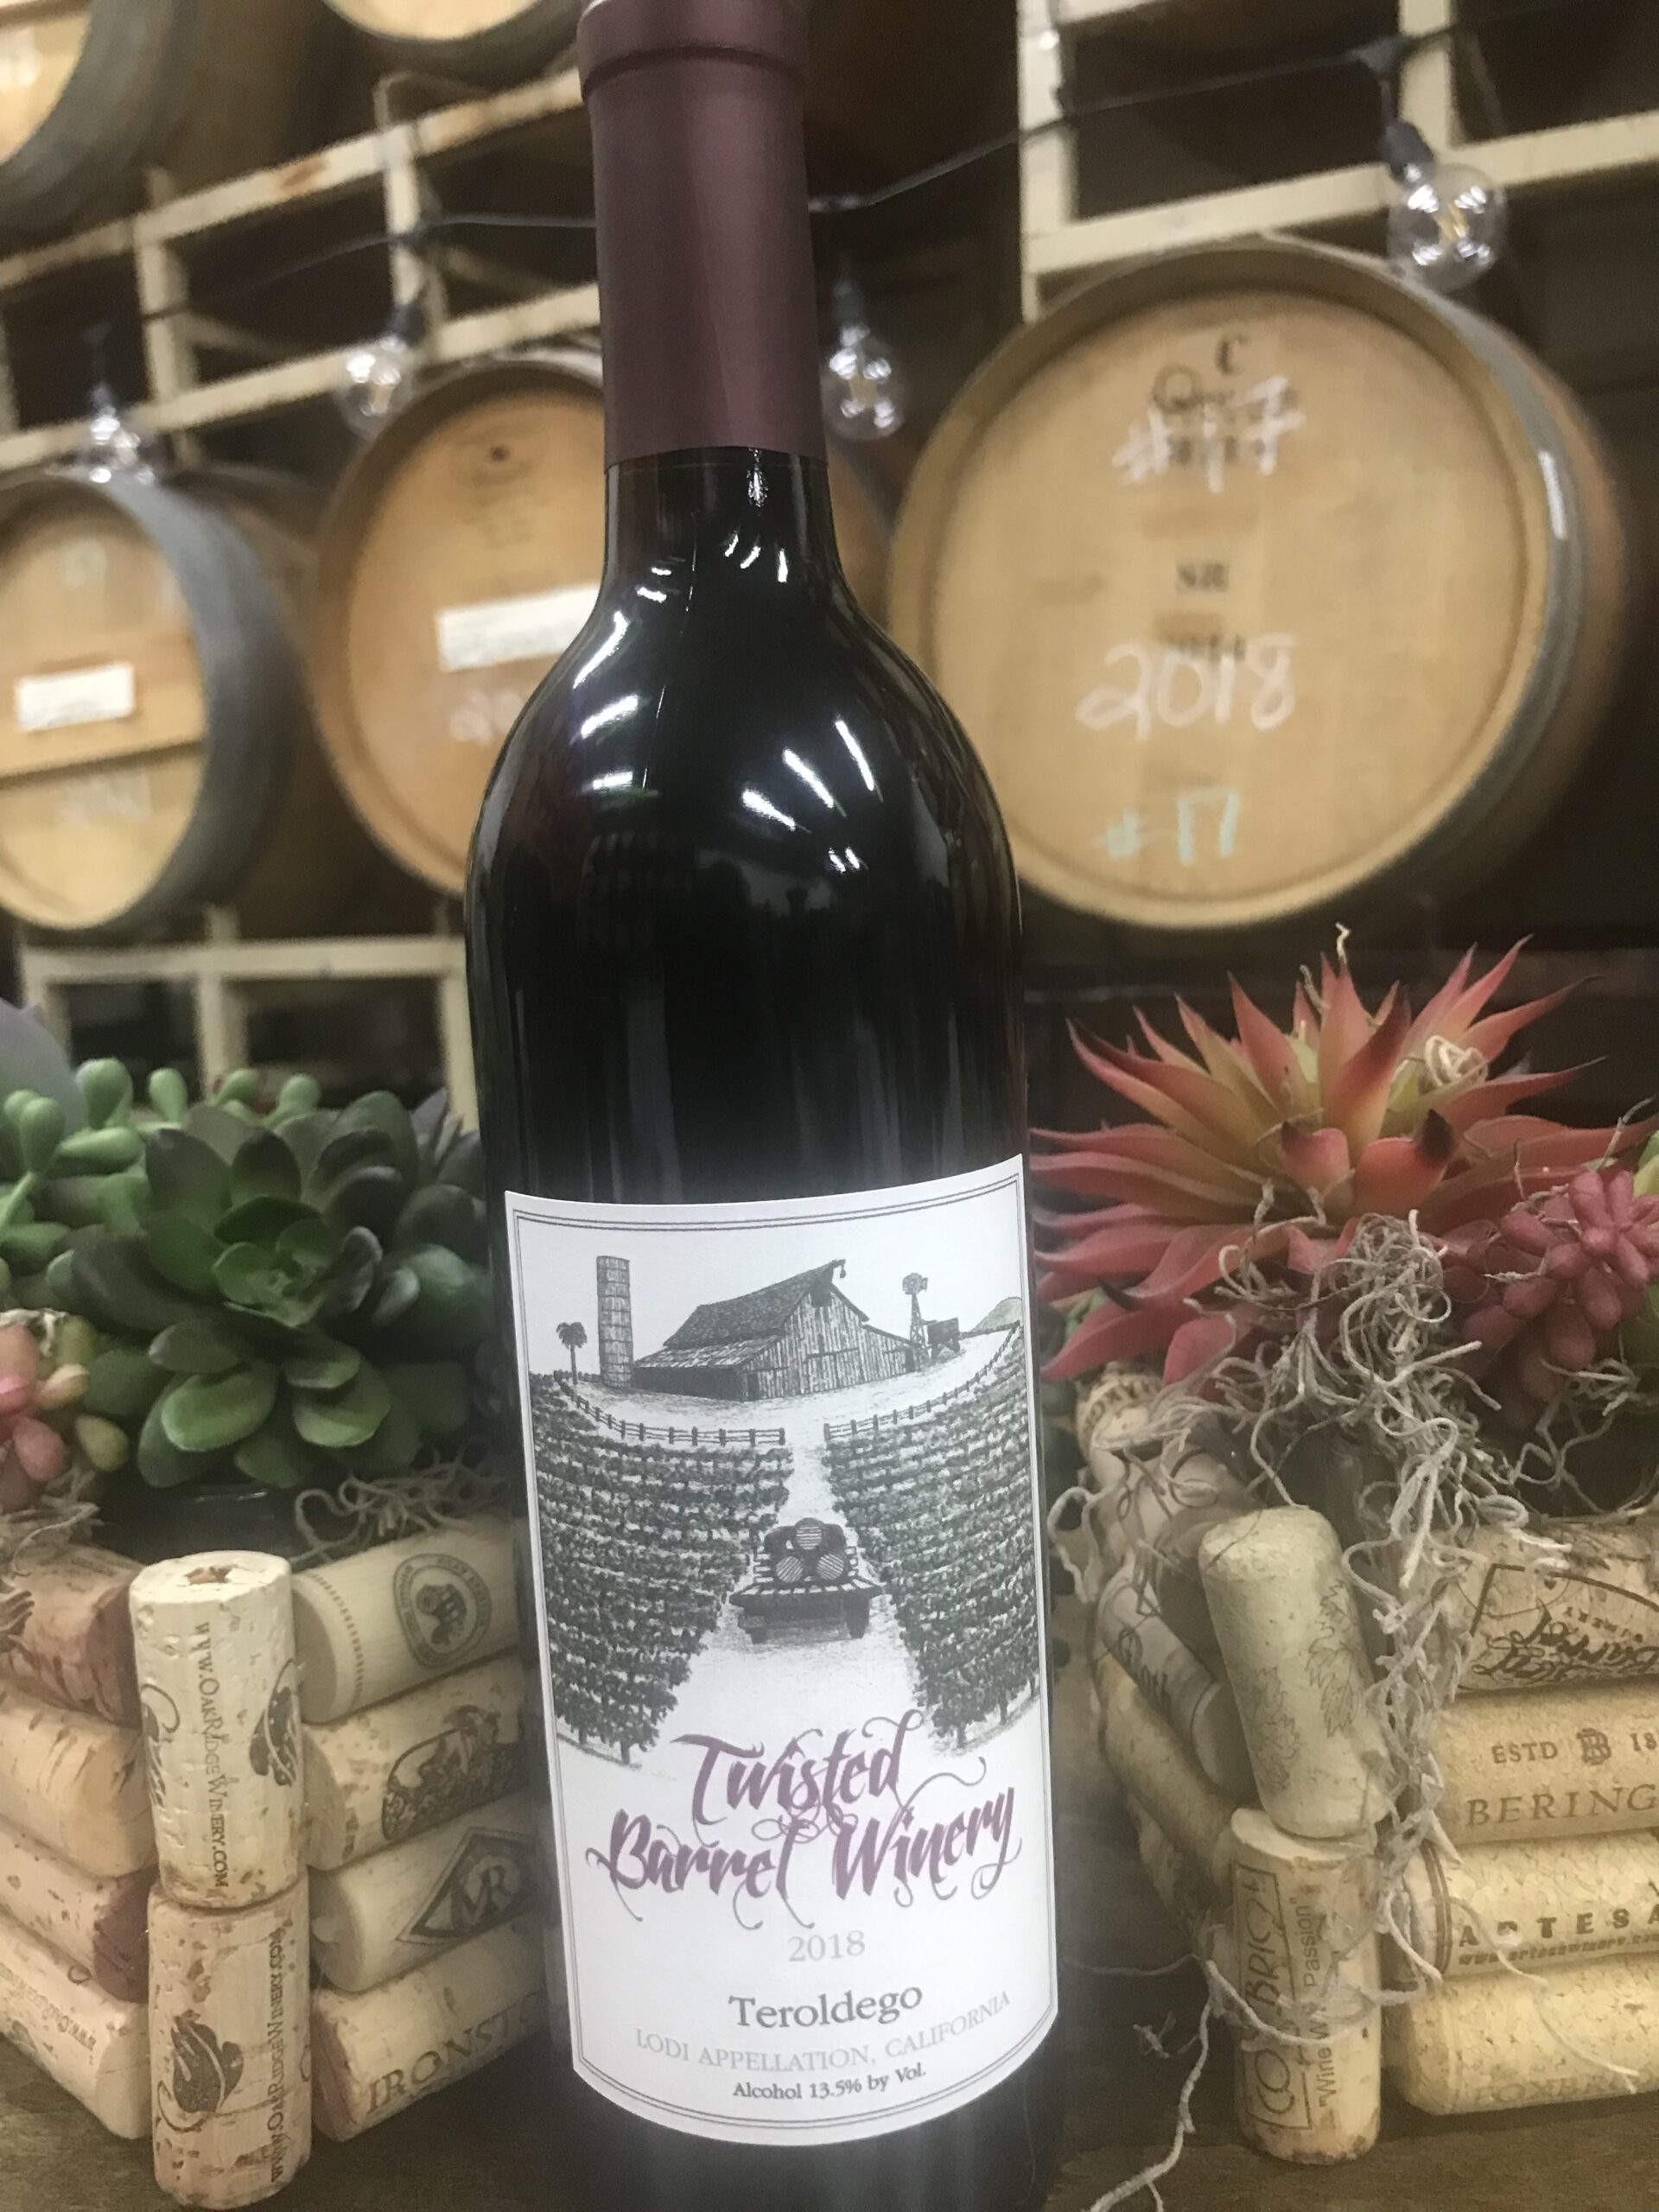 Red Wines | Winery Barrel Twisted